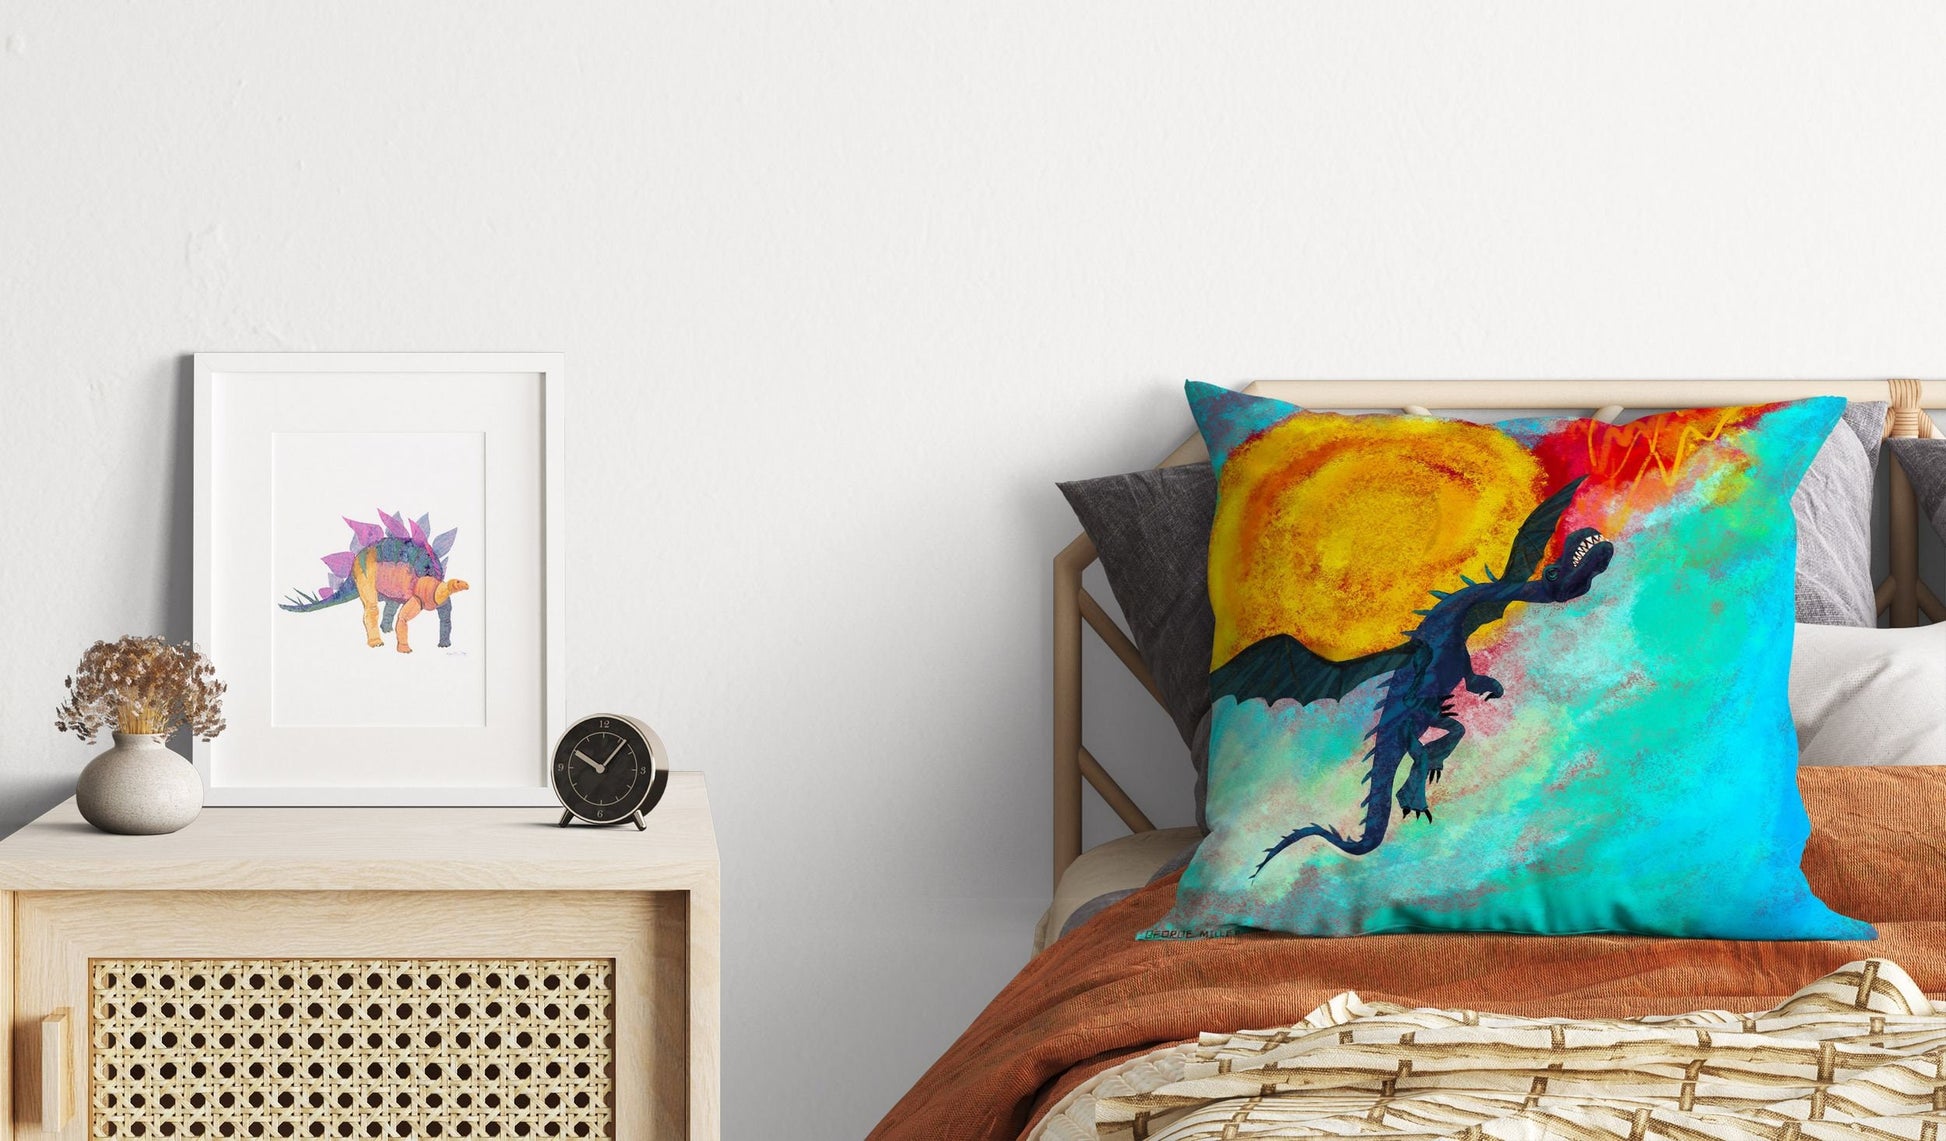 Fire Breathing Dragon Fantasy Pillow Cases For Kids, Decorative Pillow, Abstract Throw Pillow Cover, Artist Pillow, Colorful Pillow Case